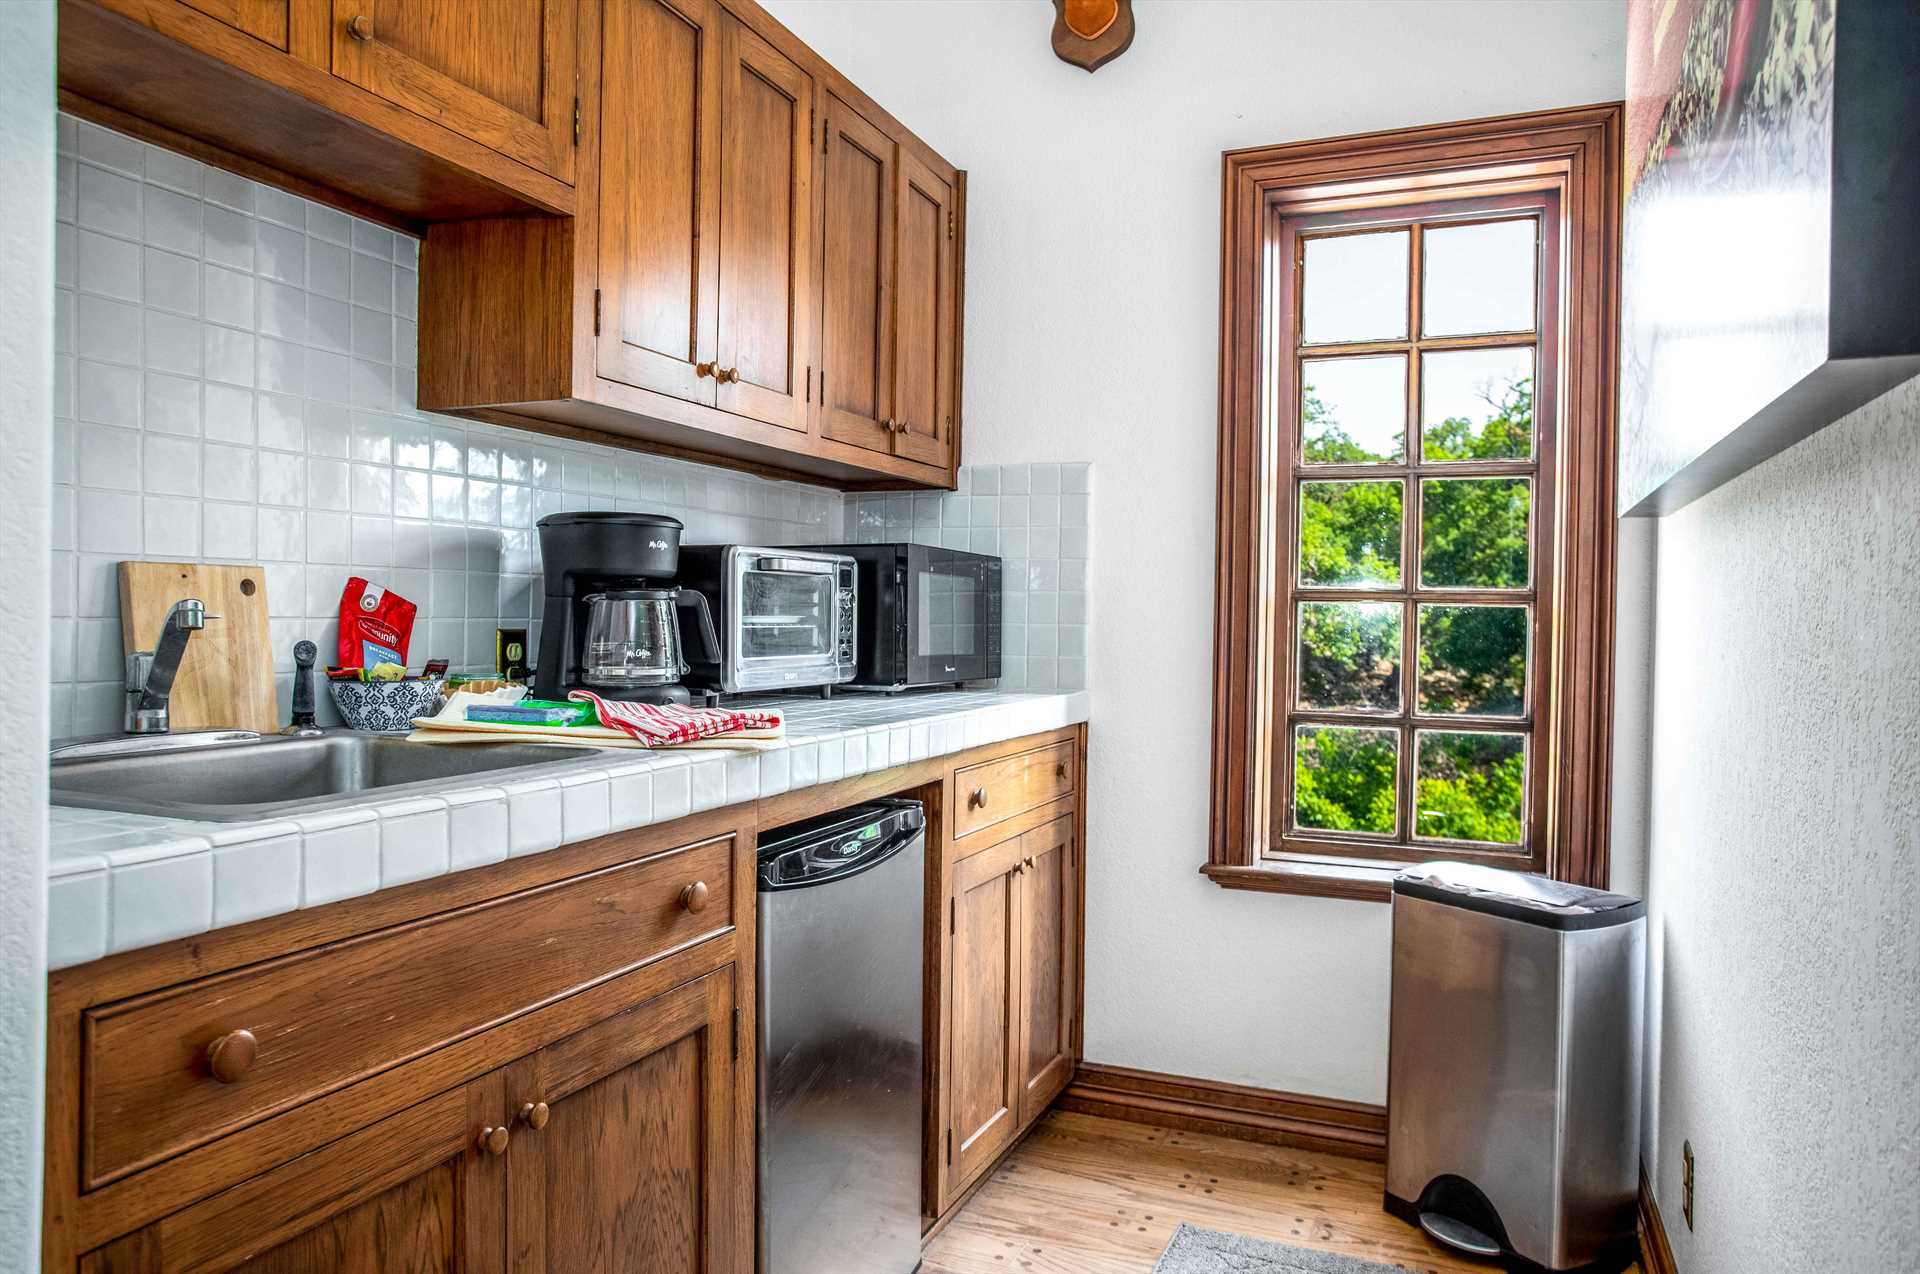                                                 The Casita's cozy kitchenette features a fridge, microwave, sink, toaster oven, and coffee maker!